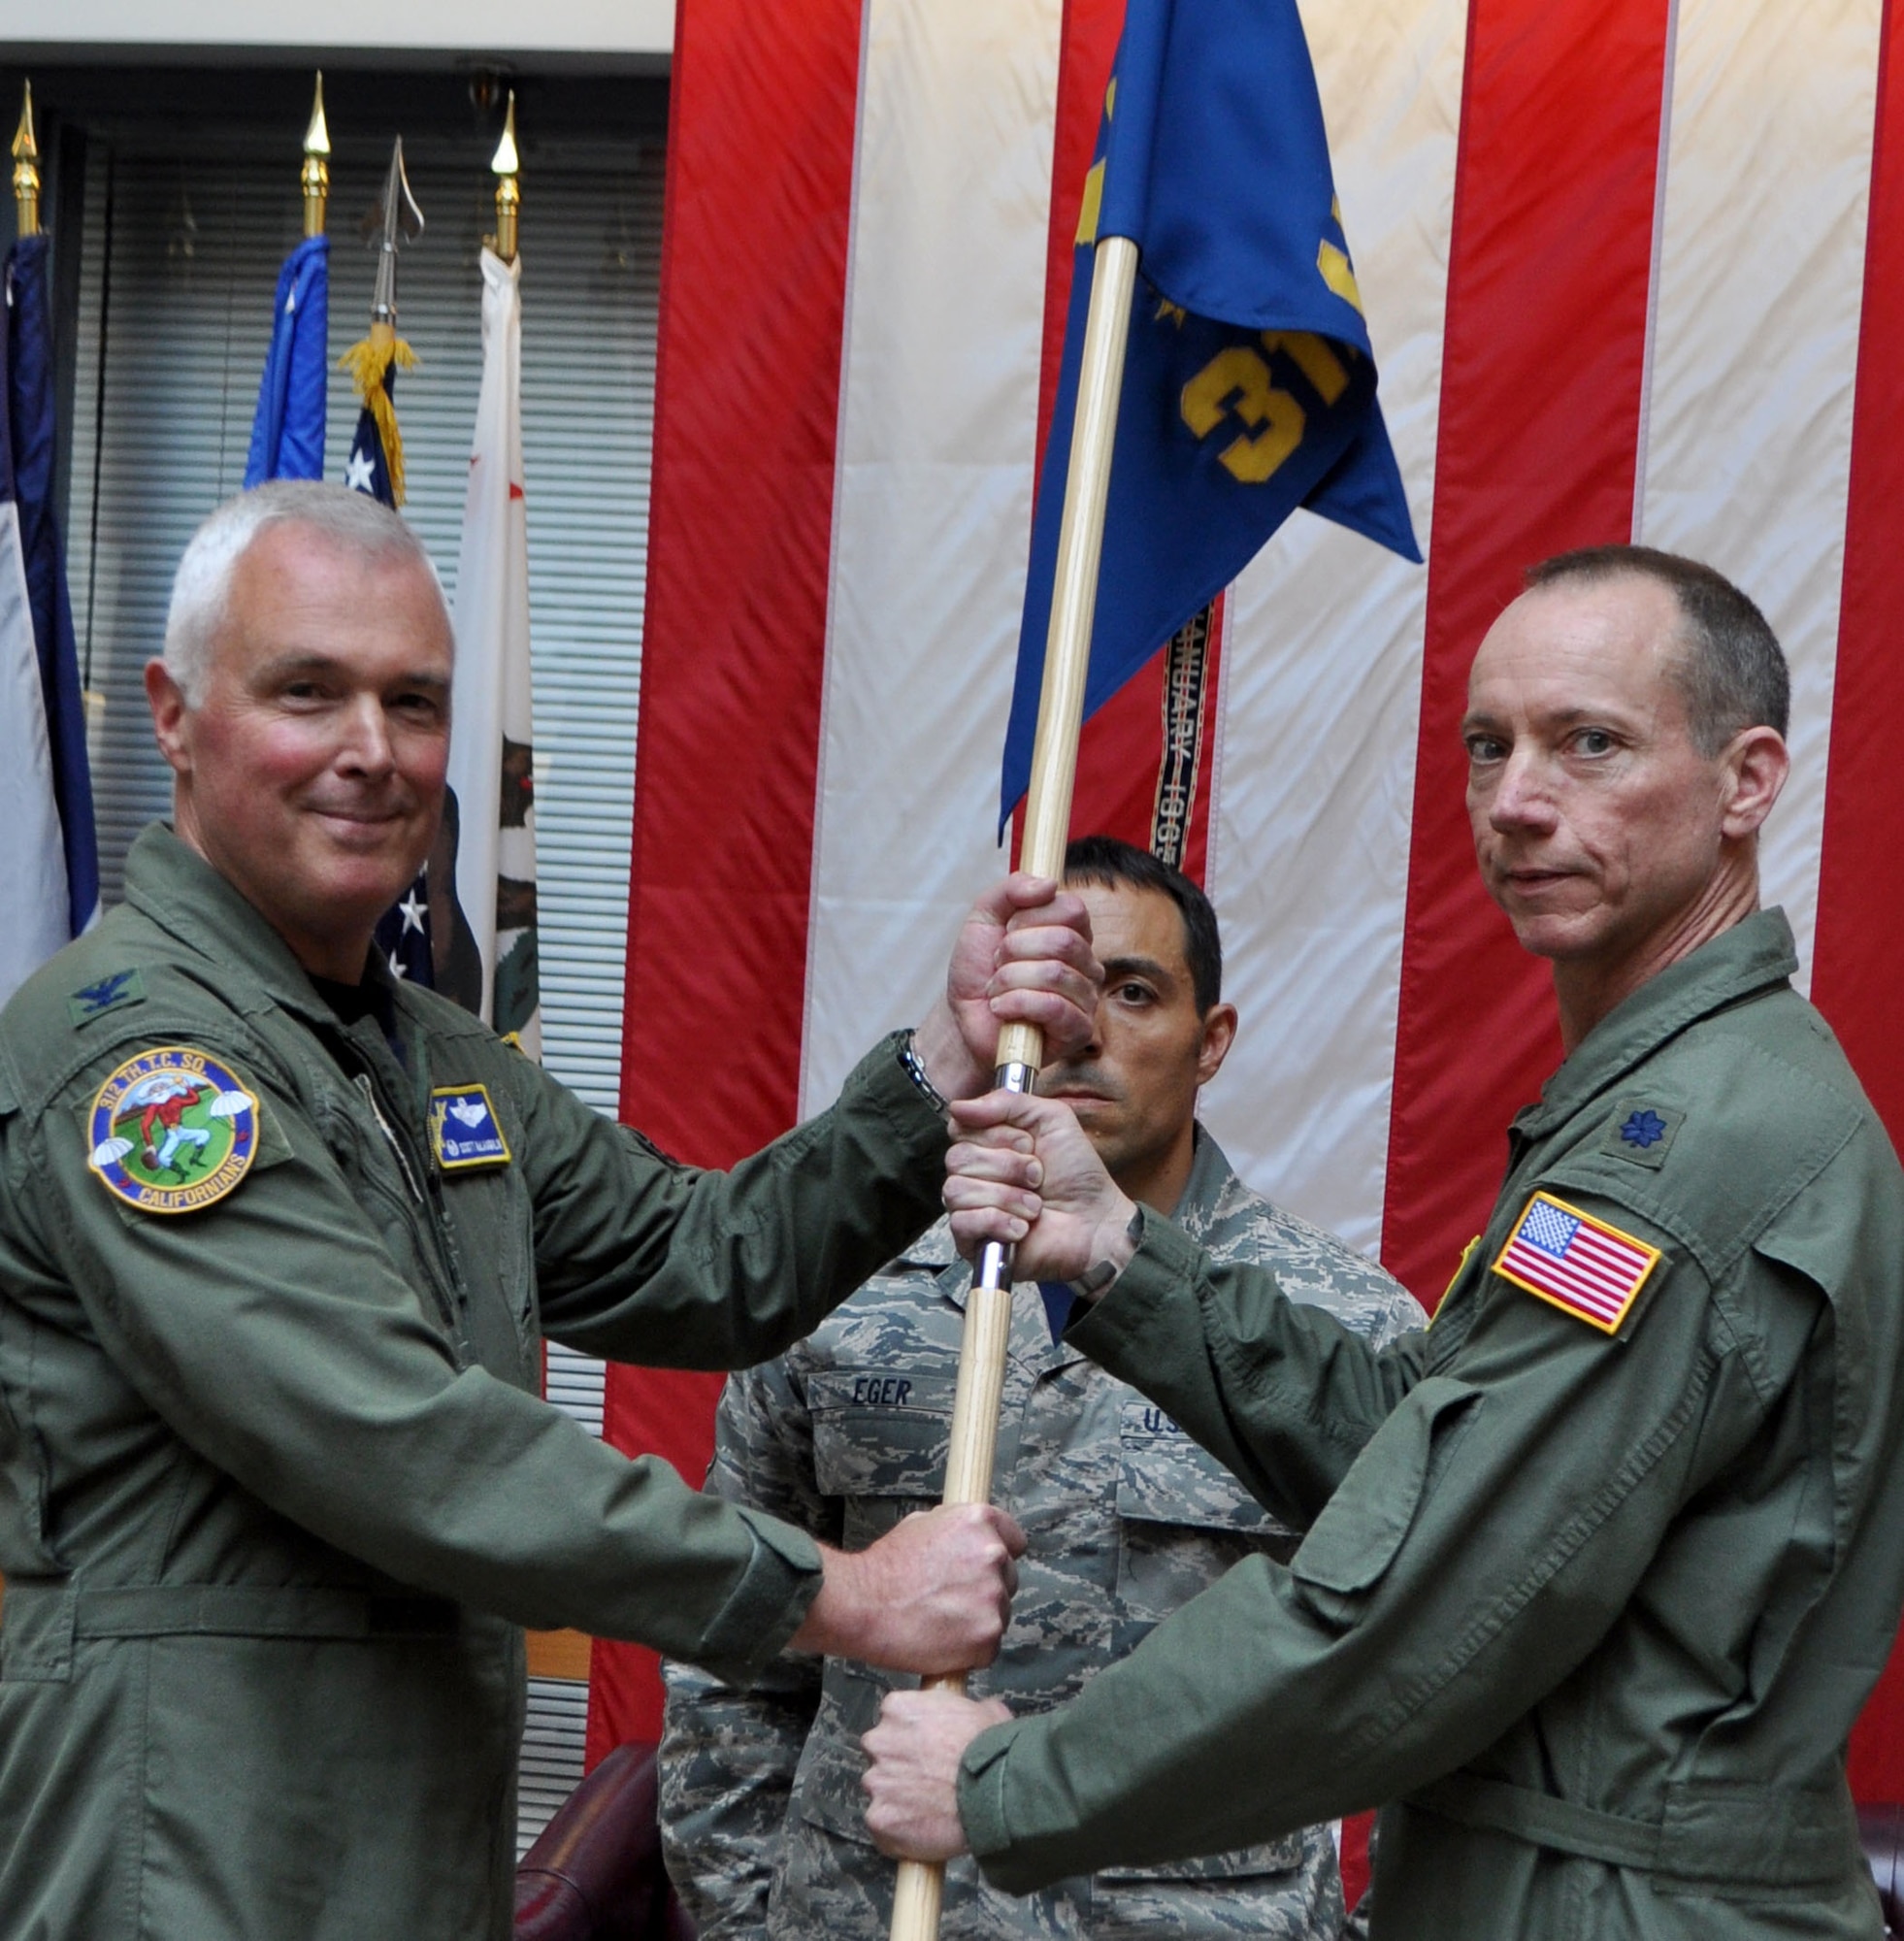 TRAVIS AIR FORCE BASE, Calif. -- In a time-honored tradition, the passing of a squadron flag signifies a change of command. Here, Lt. Col. Kevin Lane, 312th Airlift Squadron, passes the flag to 349th Operations Group Commander, Col. Scott McLaughlin, thus relinquishing command. (U.S. Air Force photo/Ellen Hatfield)